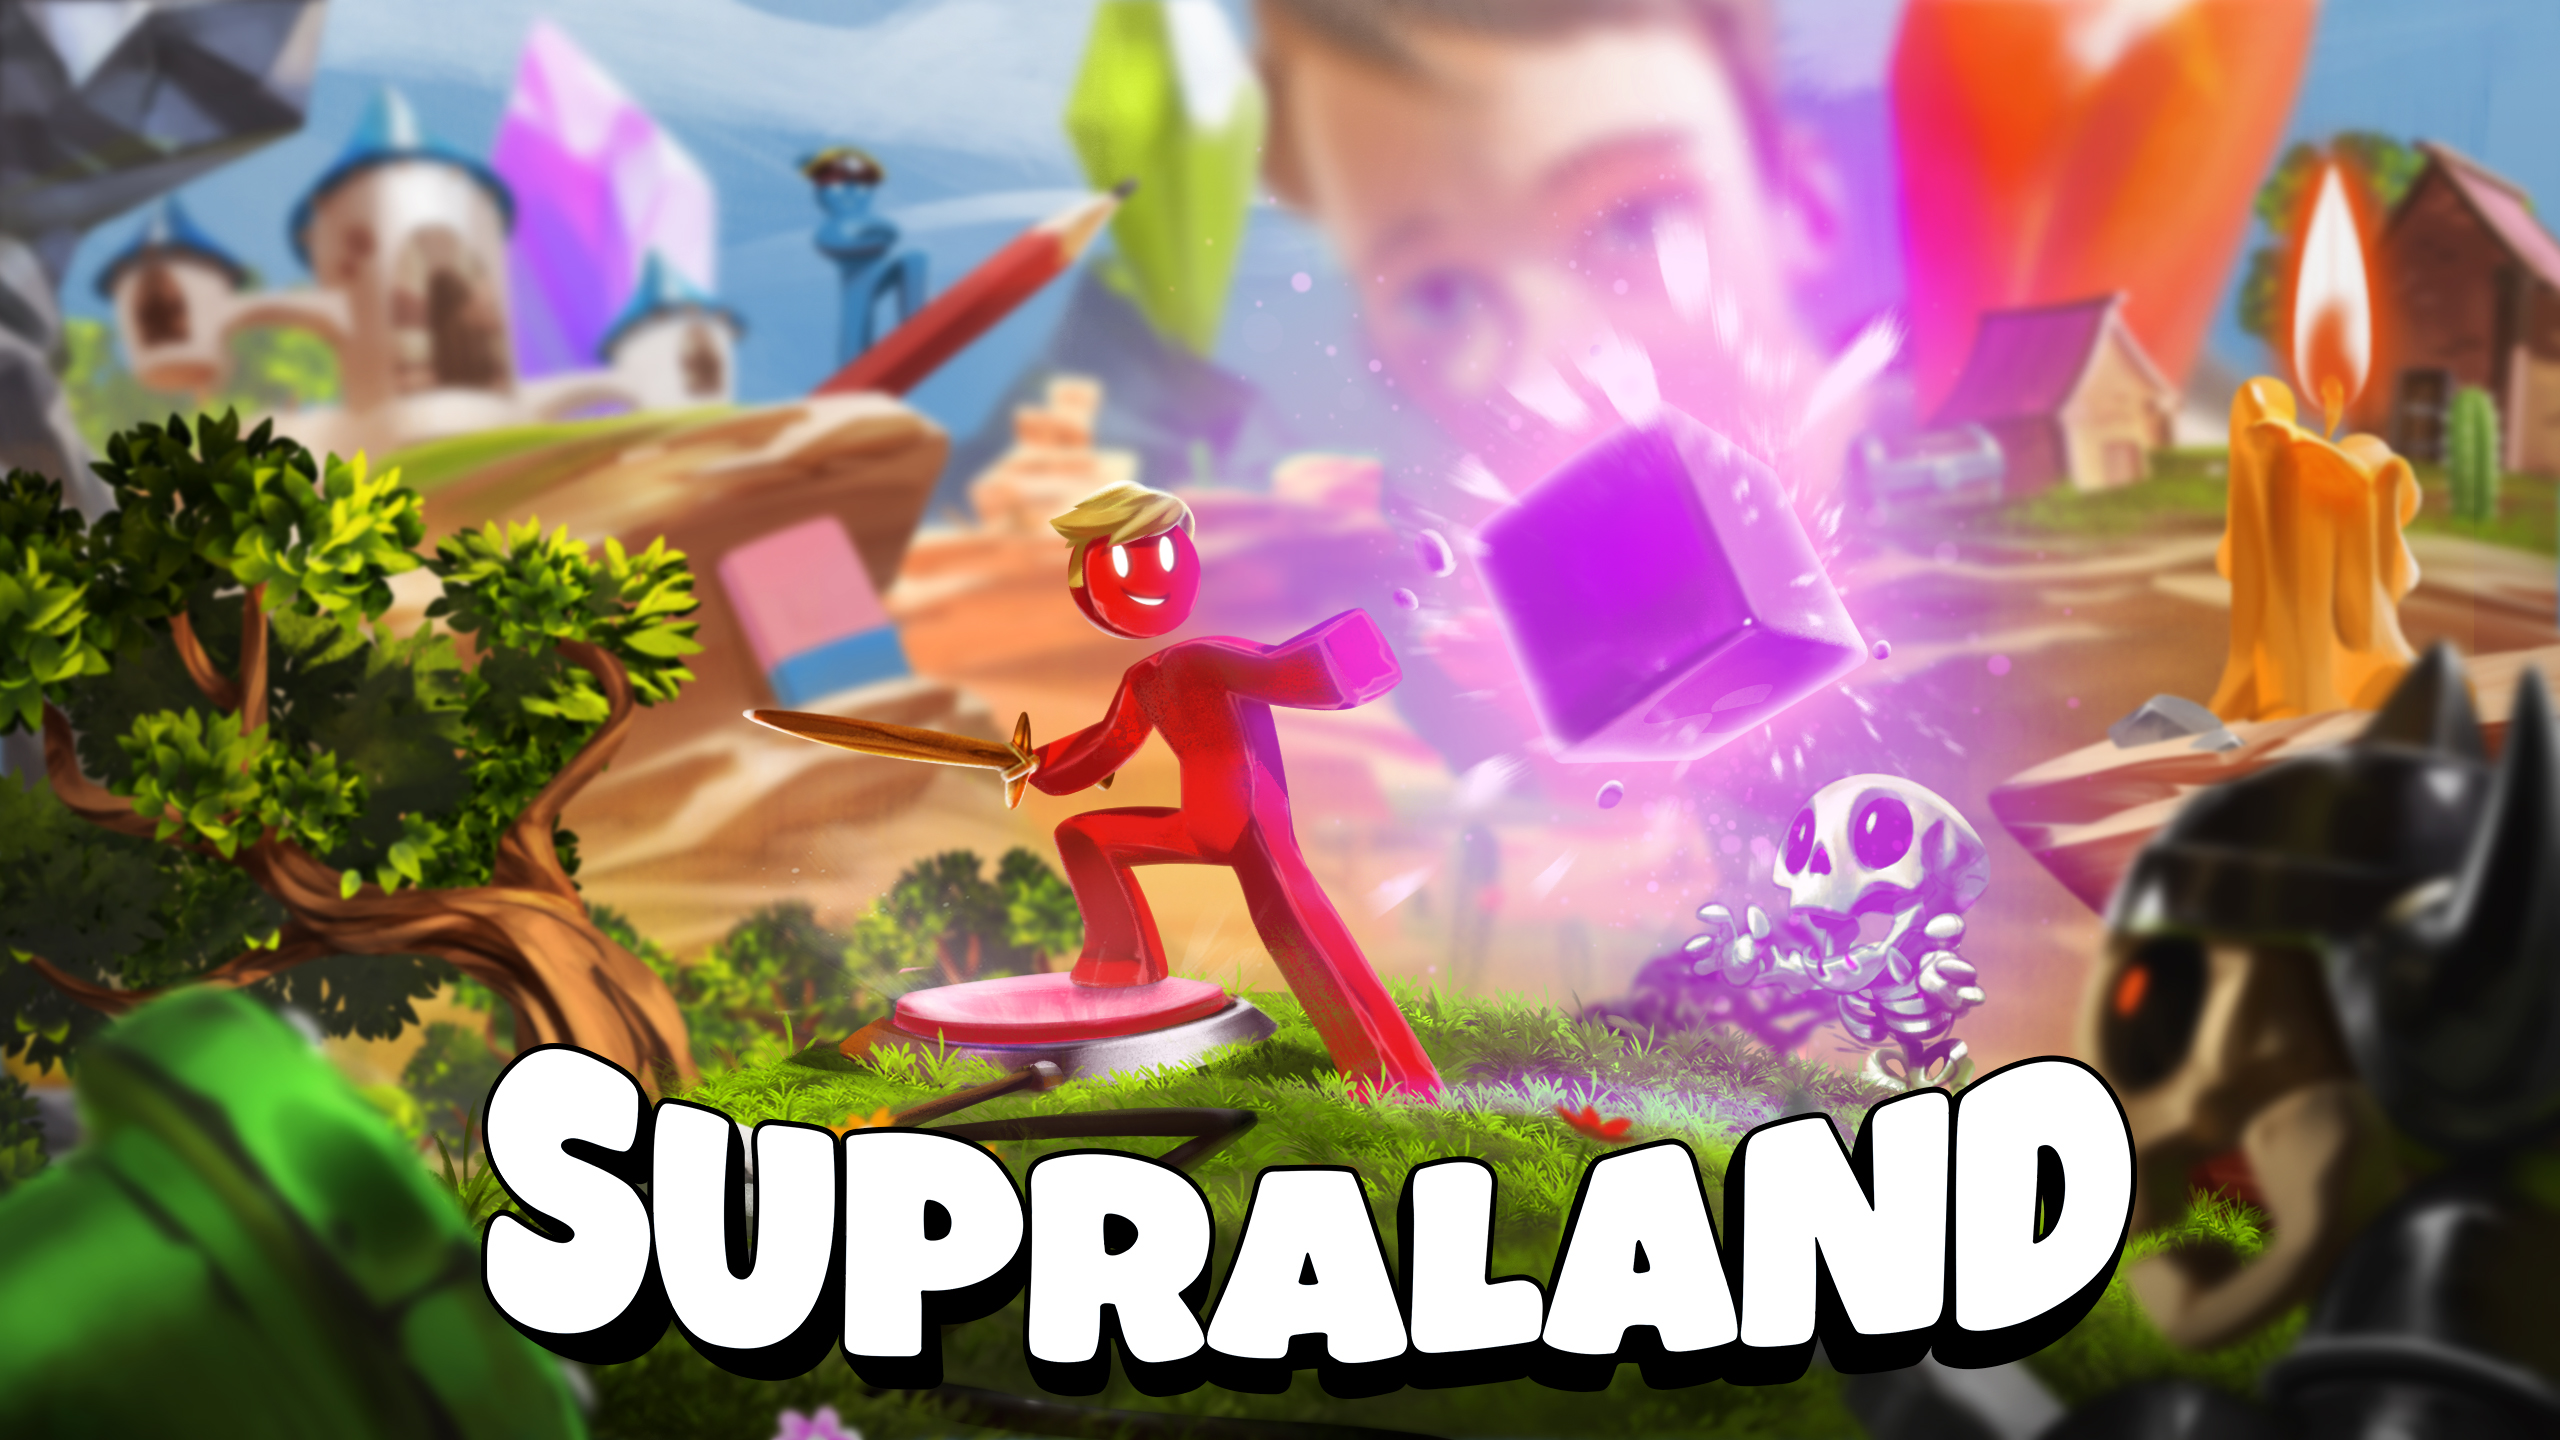 Supraland: free desktop wallpapers and background images